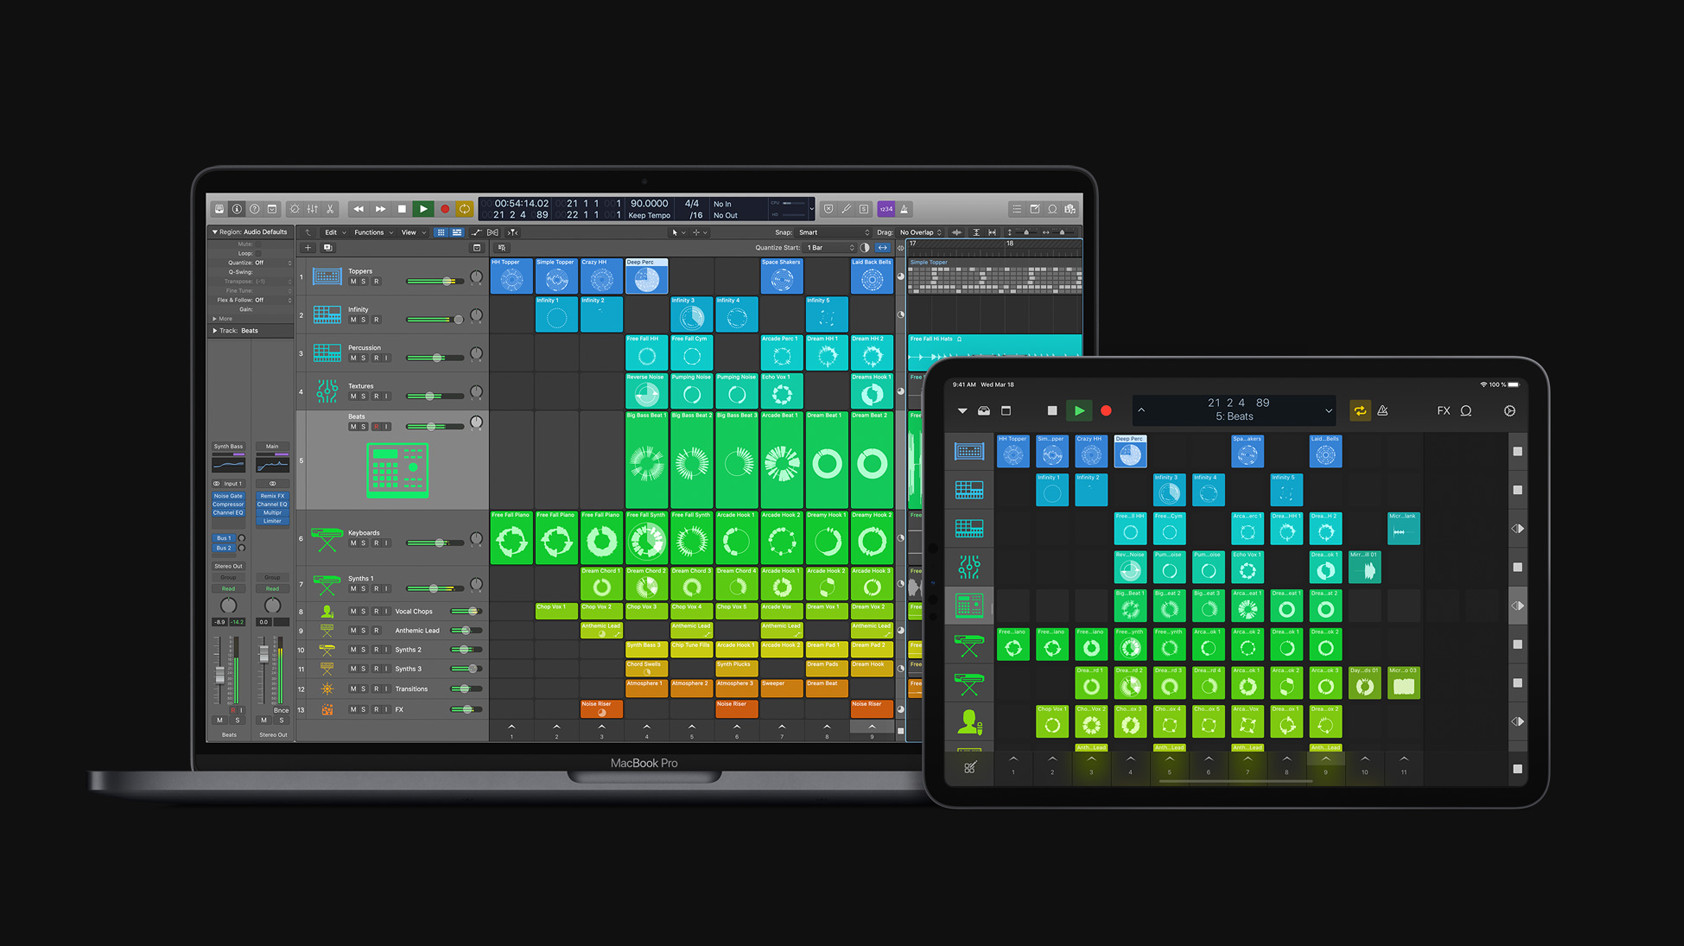 This is a picture of Logic Pro X DAW running on a MacBook Pro alongside the iPad Pro using the Logic Remote app.